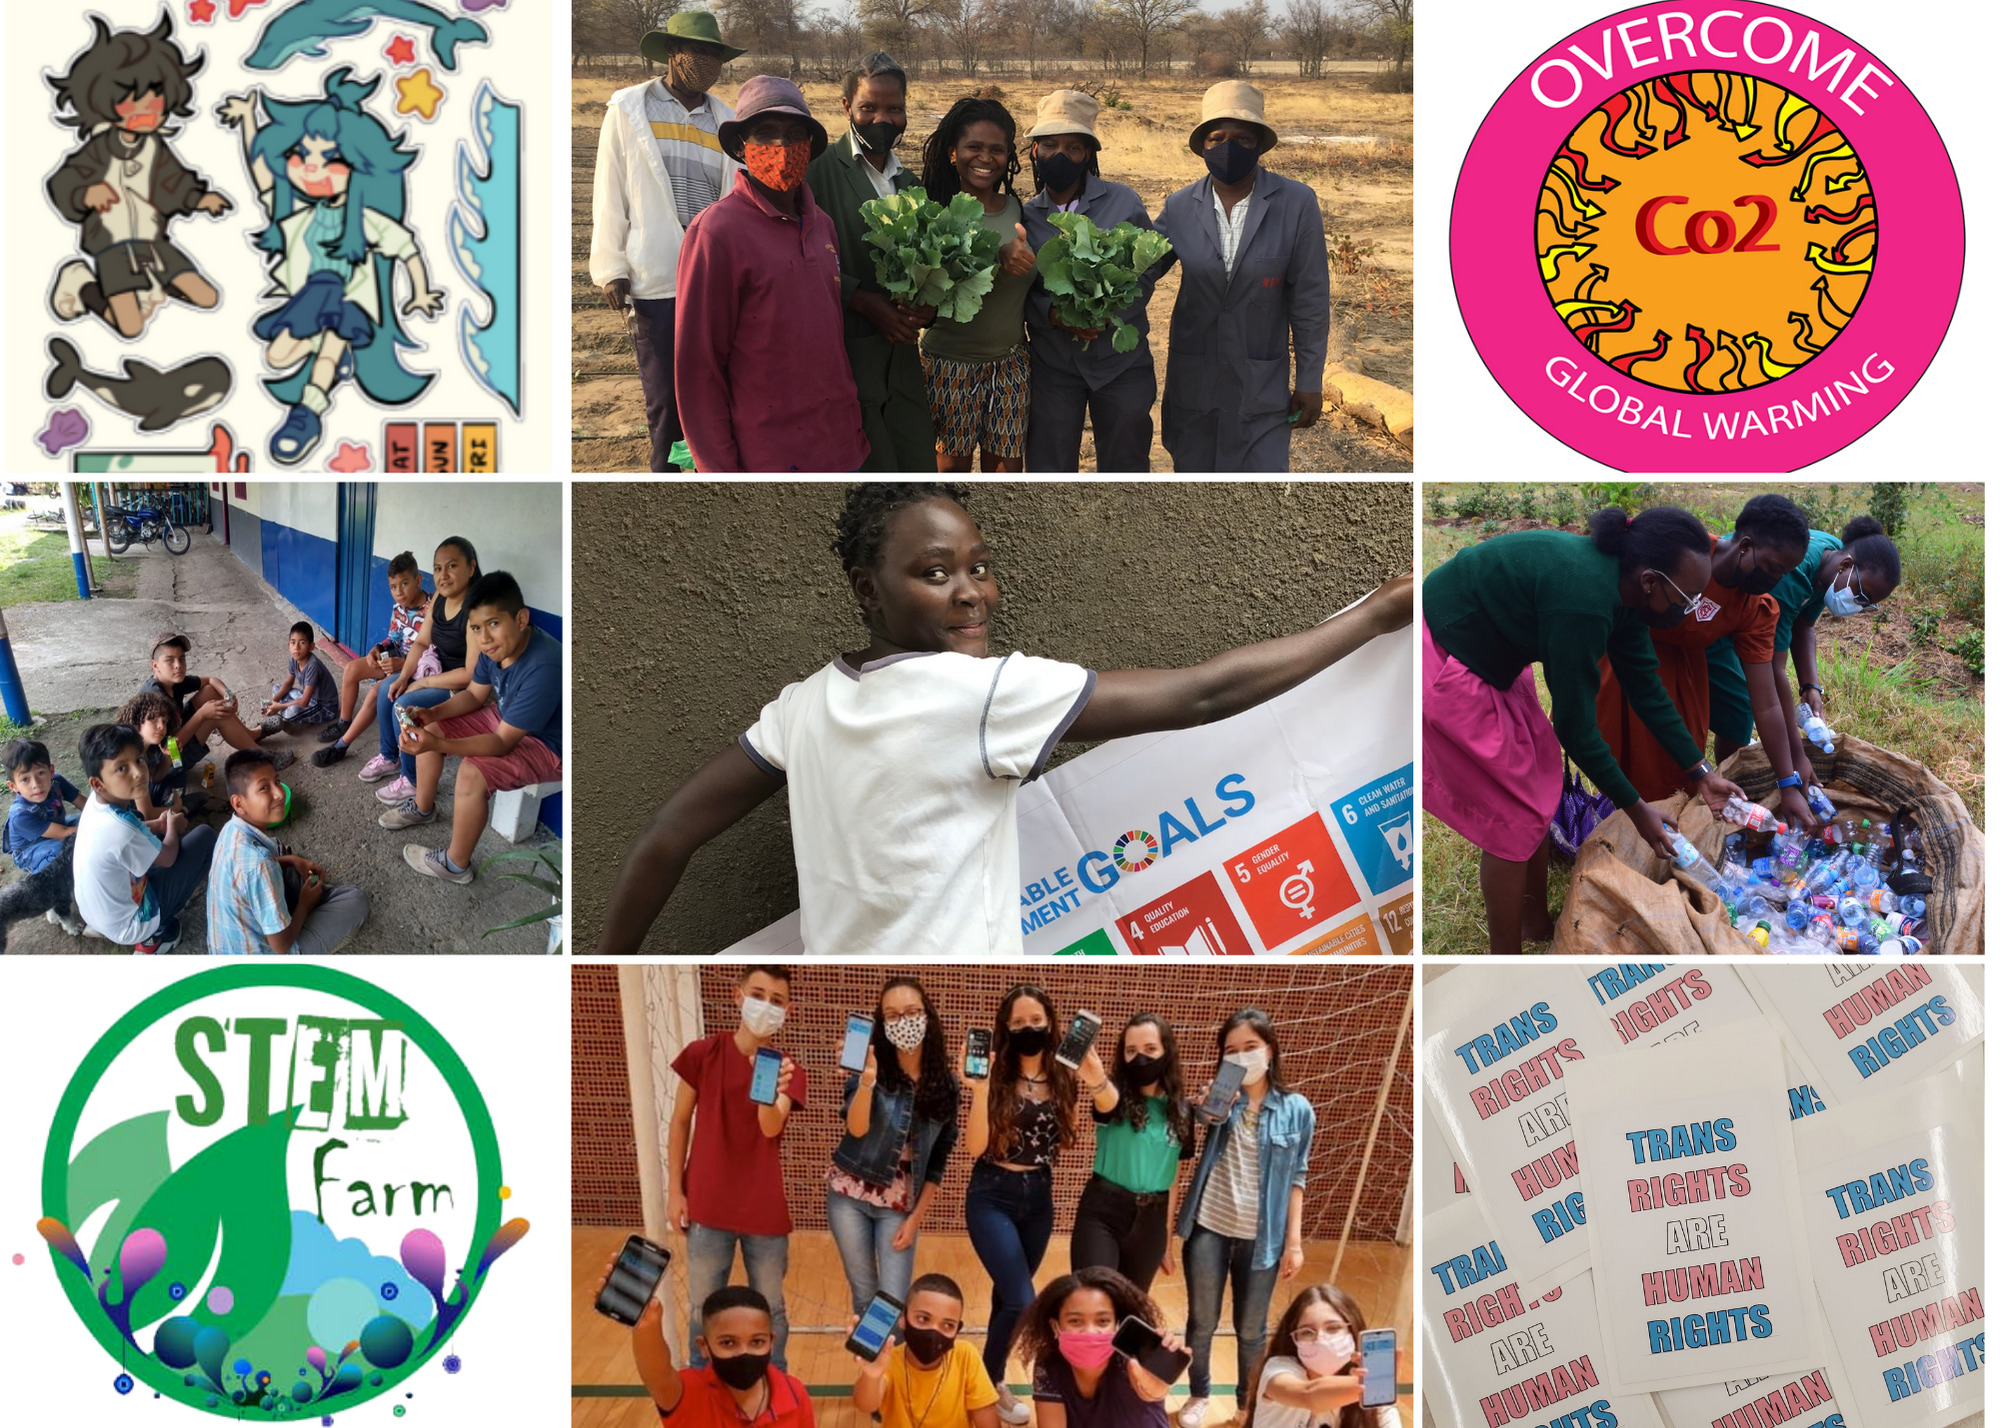 Nine small images in a grid, from top left: stickers, people on farm, Overcome Global Warming graphic, students in circle, student holding SDGs poster, students recycling plastic bottles, STEM Farm logo, students holding smart phones, Trans Rights are Human Rights stickers